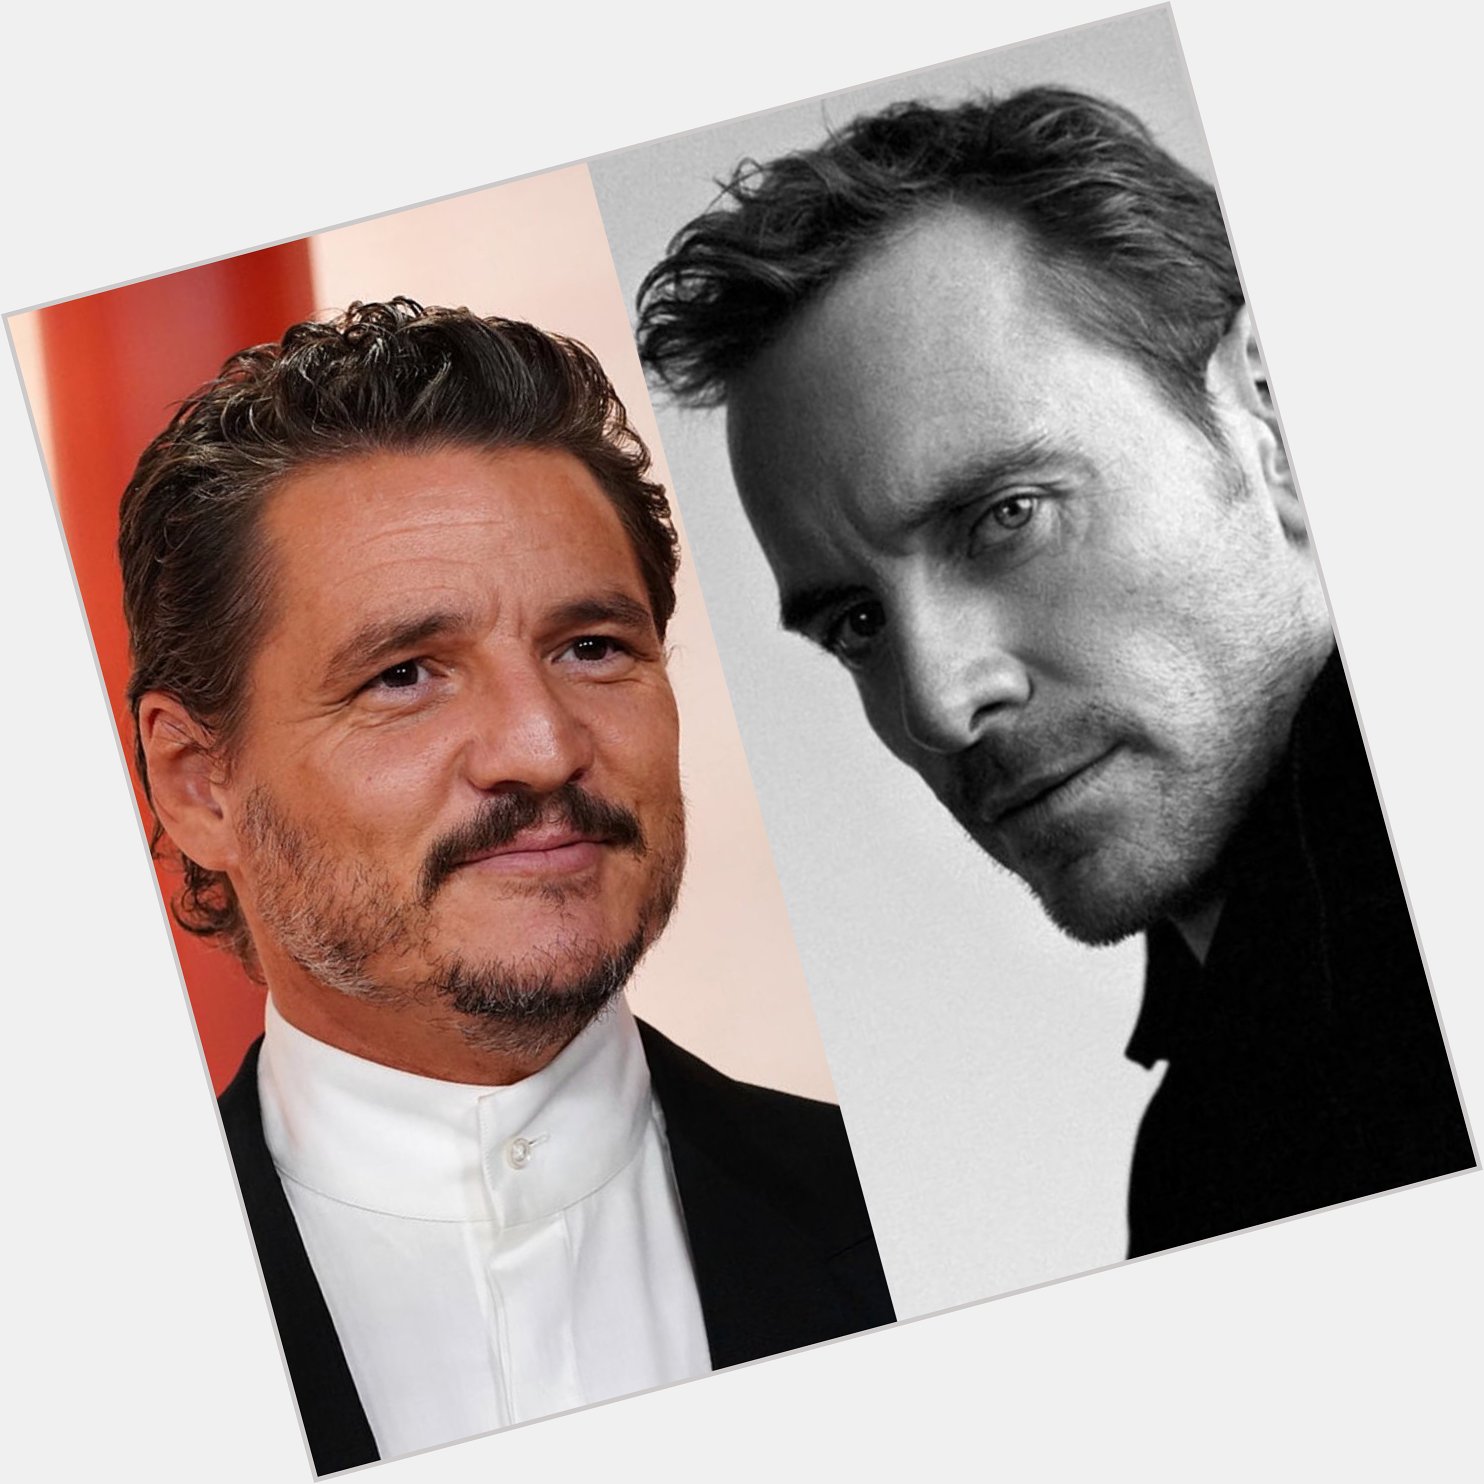 Happy Birthday To Pedro Pascal & Michael Fassbender! 